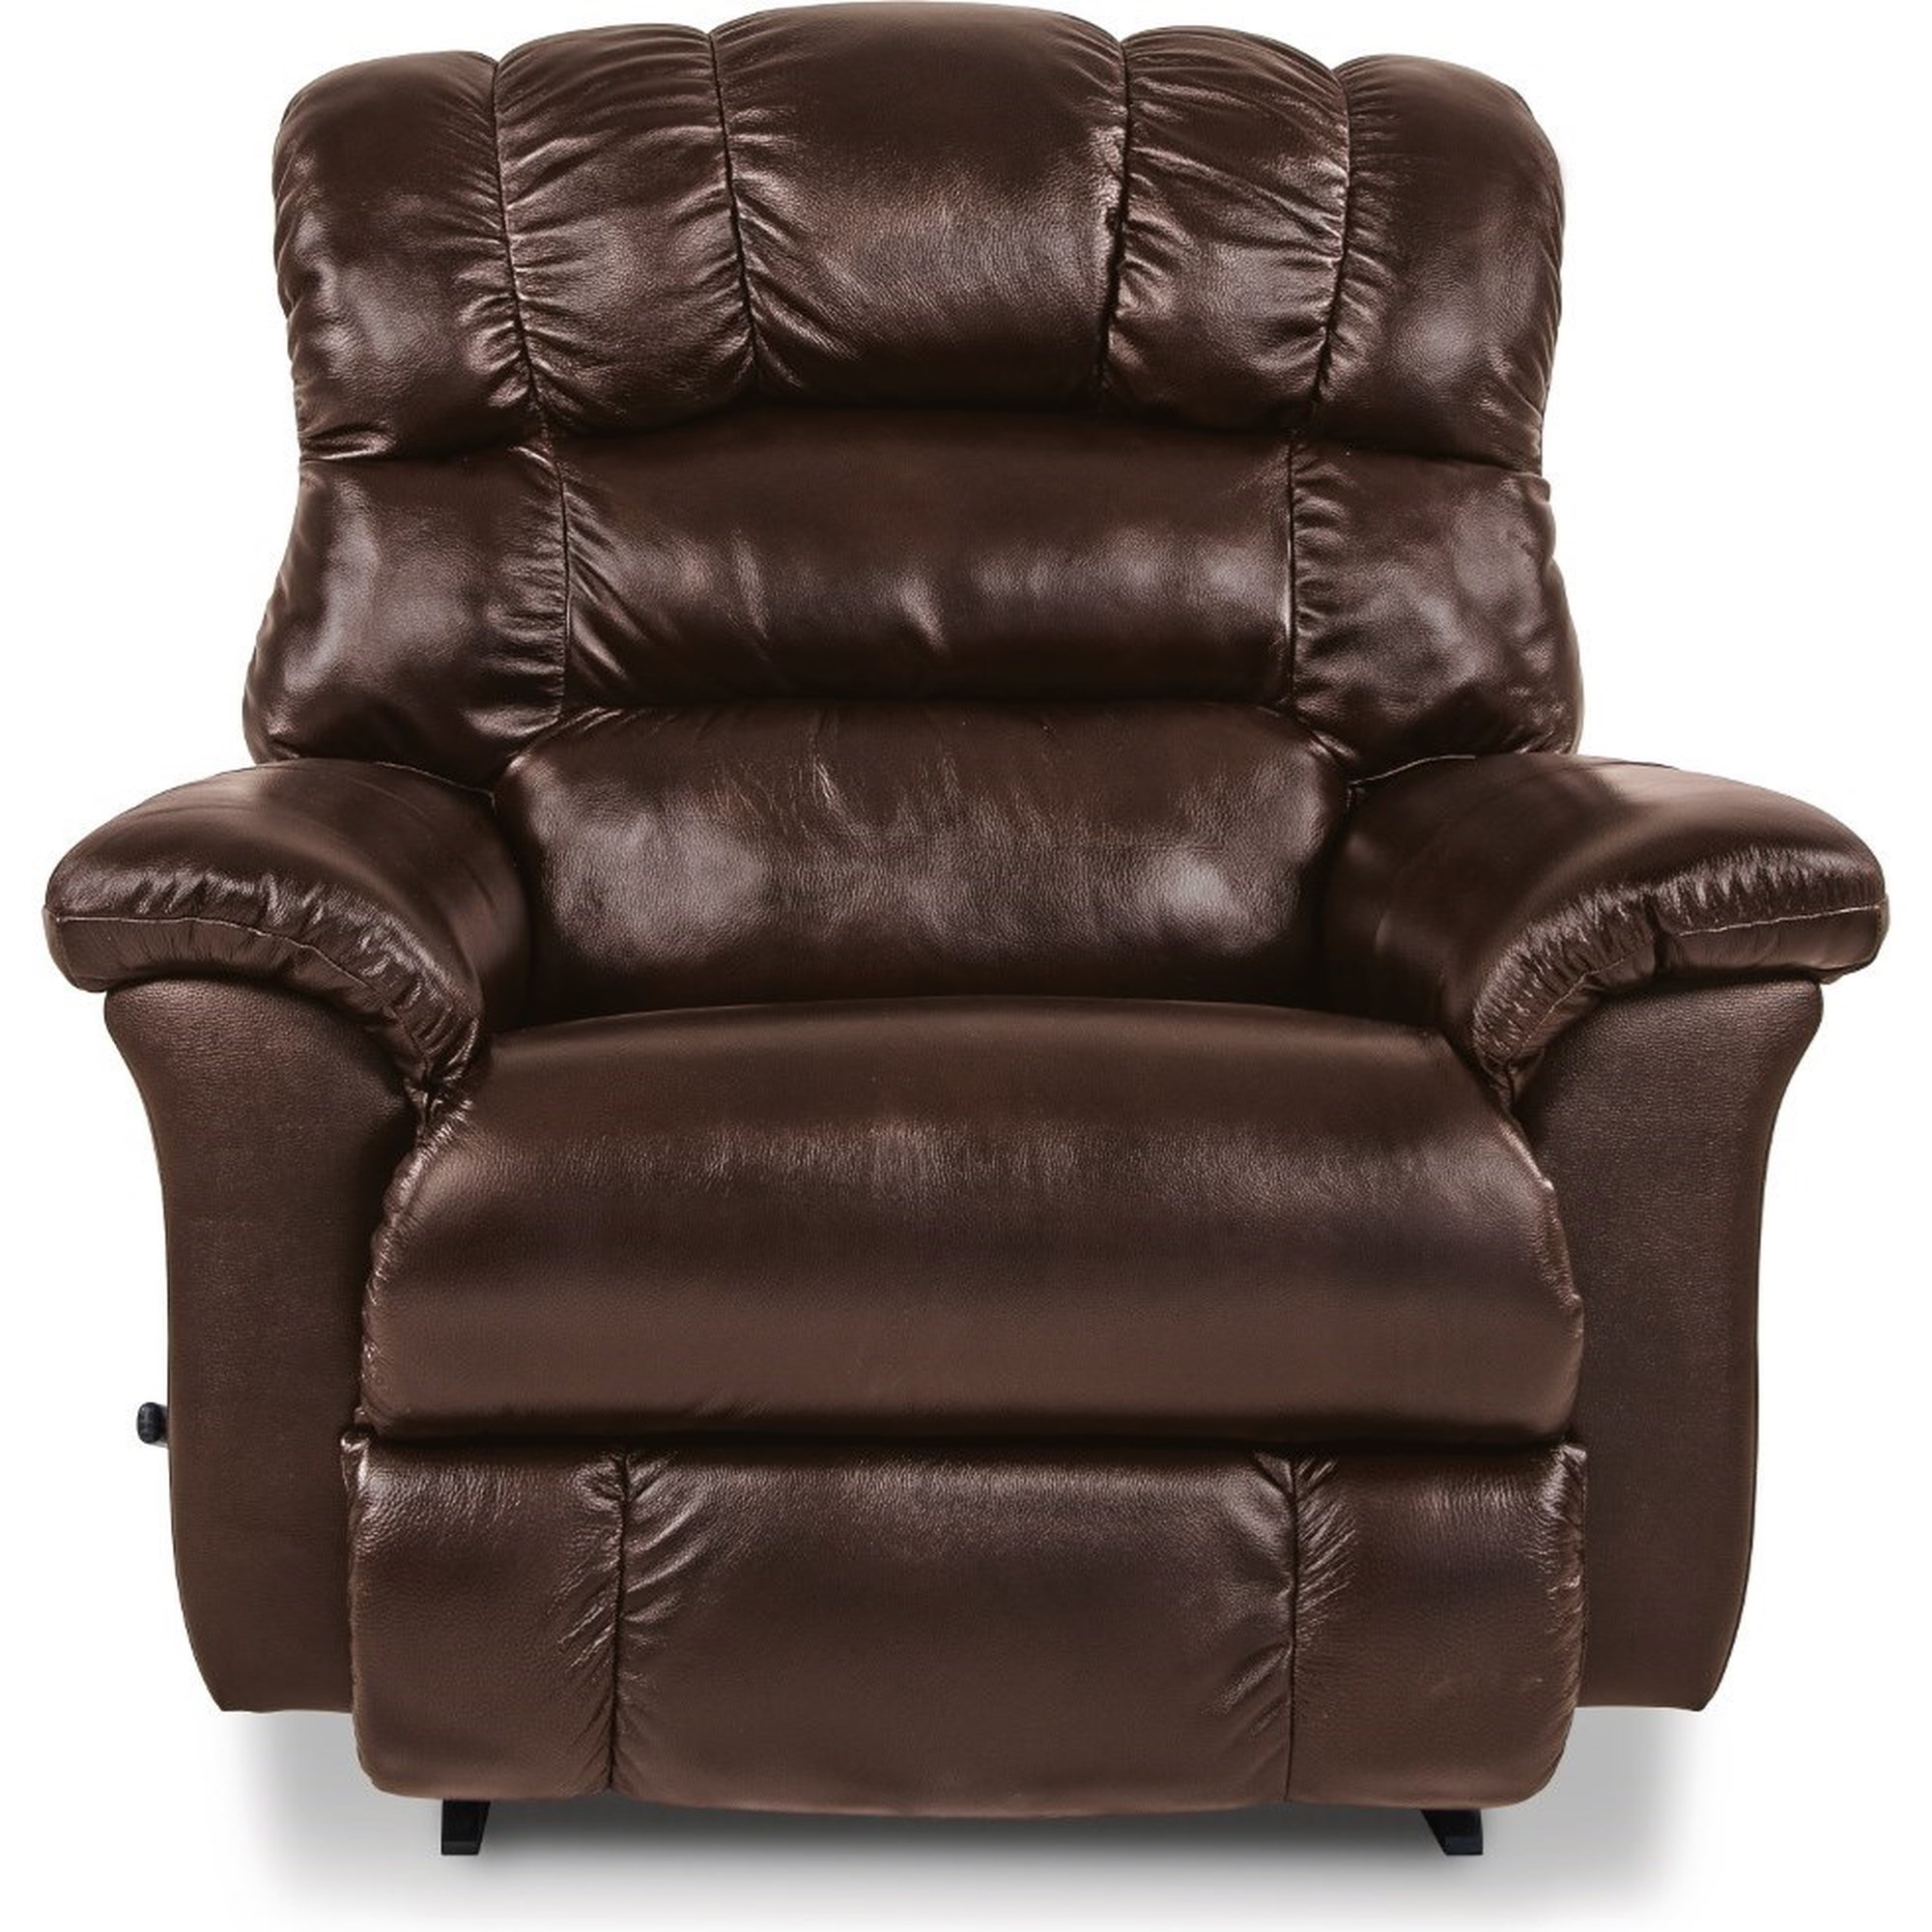 Recliner Chair – Home Style Furniture Ltd.